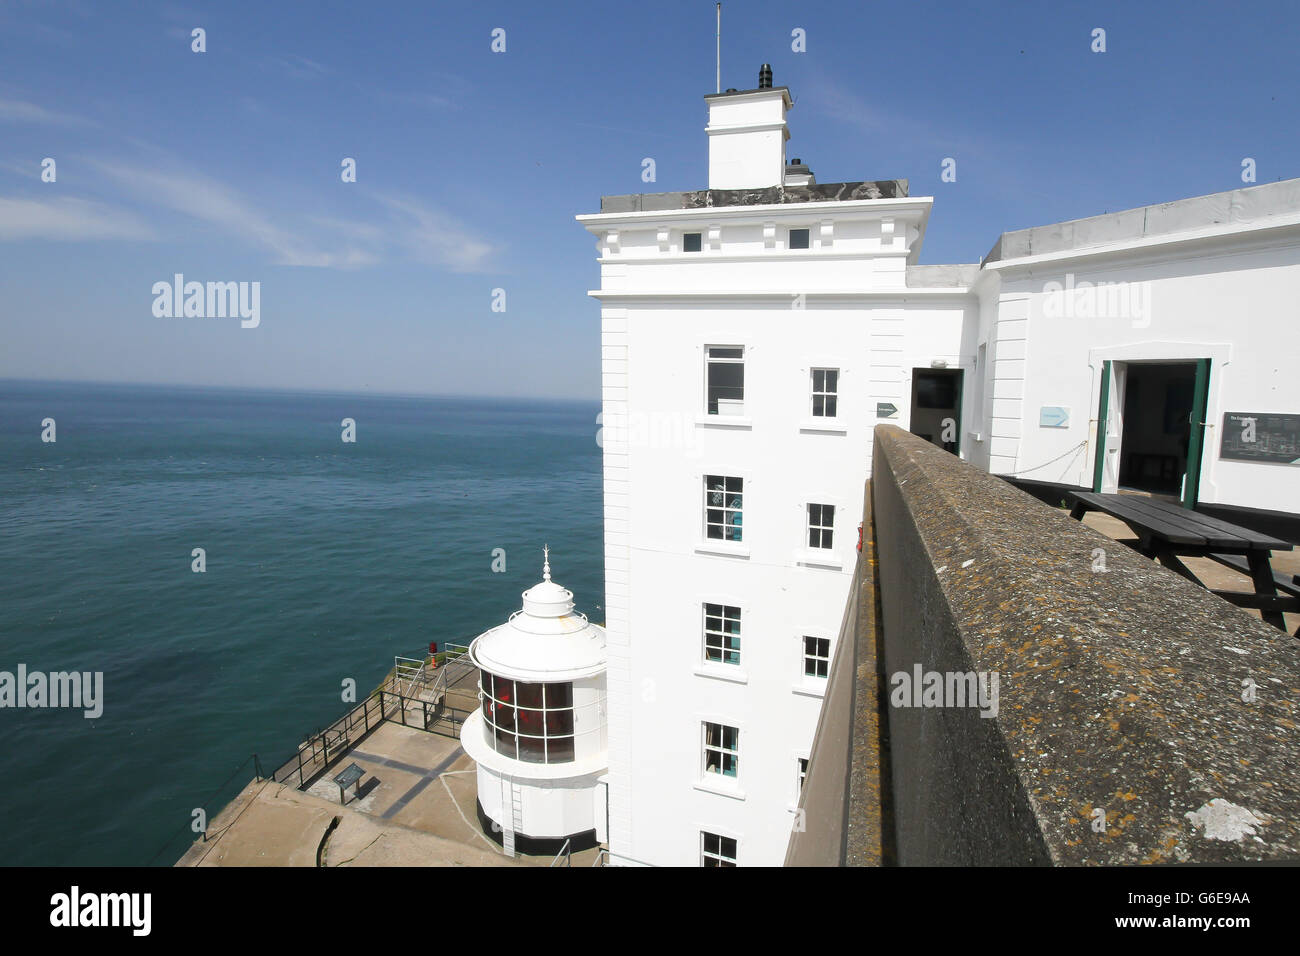 The West Lighthouse - also an RSPB sea-bird centre - on Rathlin Island, County Antrim, Northern Ireland. An inverted lighthouse with lamp at base.. Stock Photo